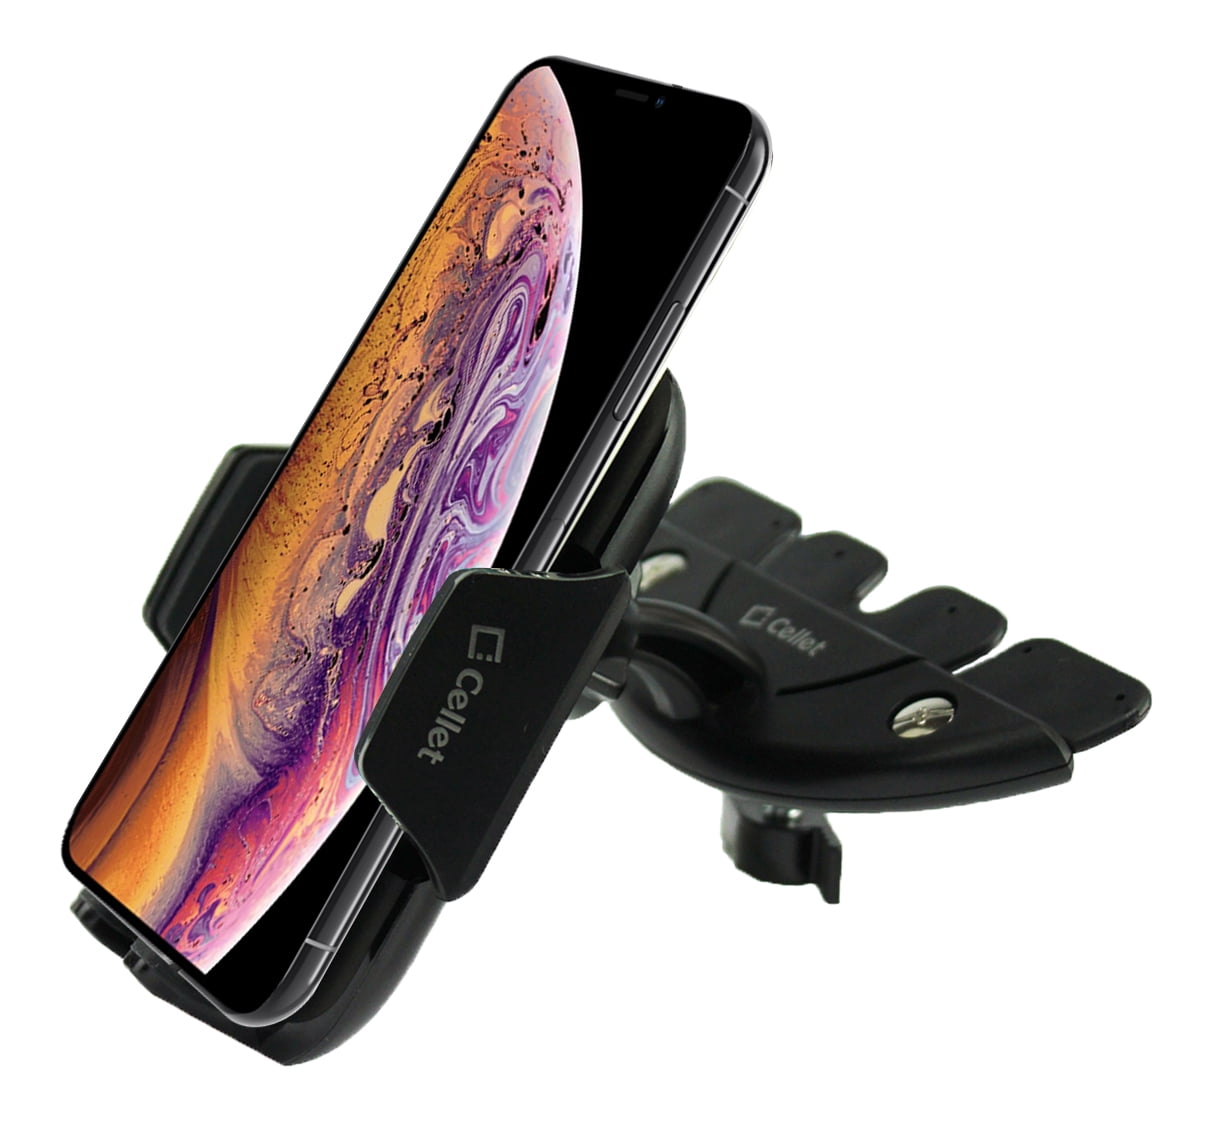 Cellet Adjustable CD Slot Smartphone Holder Cell Phone Mount Cradle Compatible with Motorola One Zoom Moto E6 Z4 Z3 G7 G6 Power Play